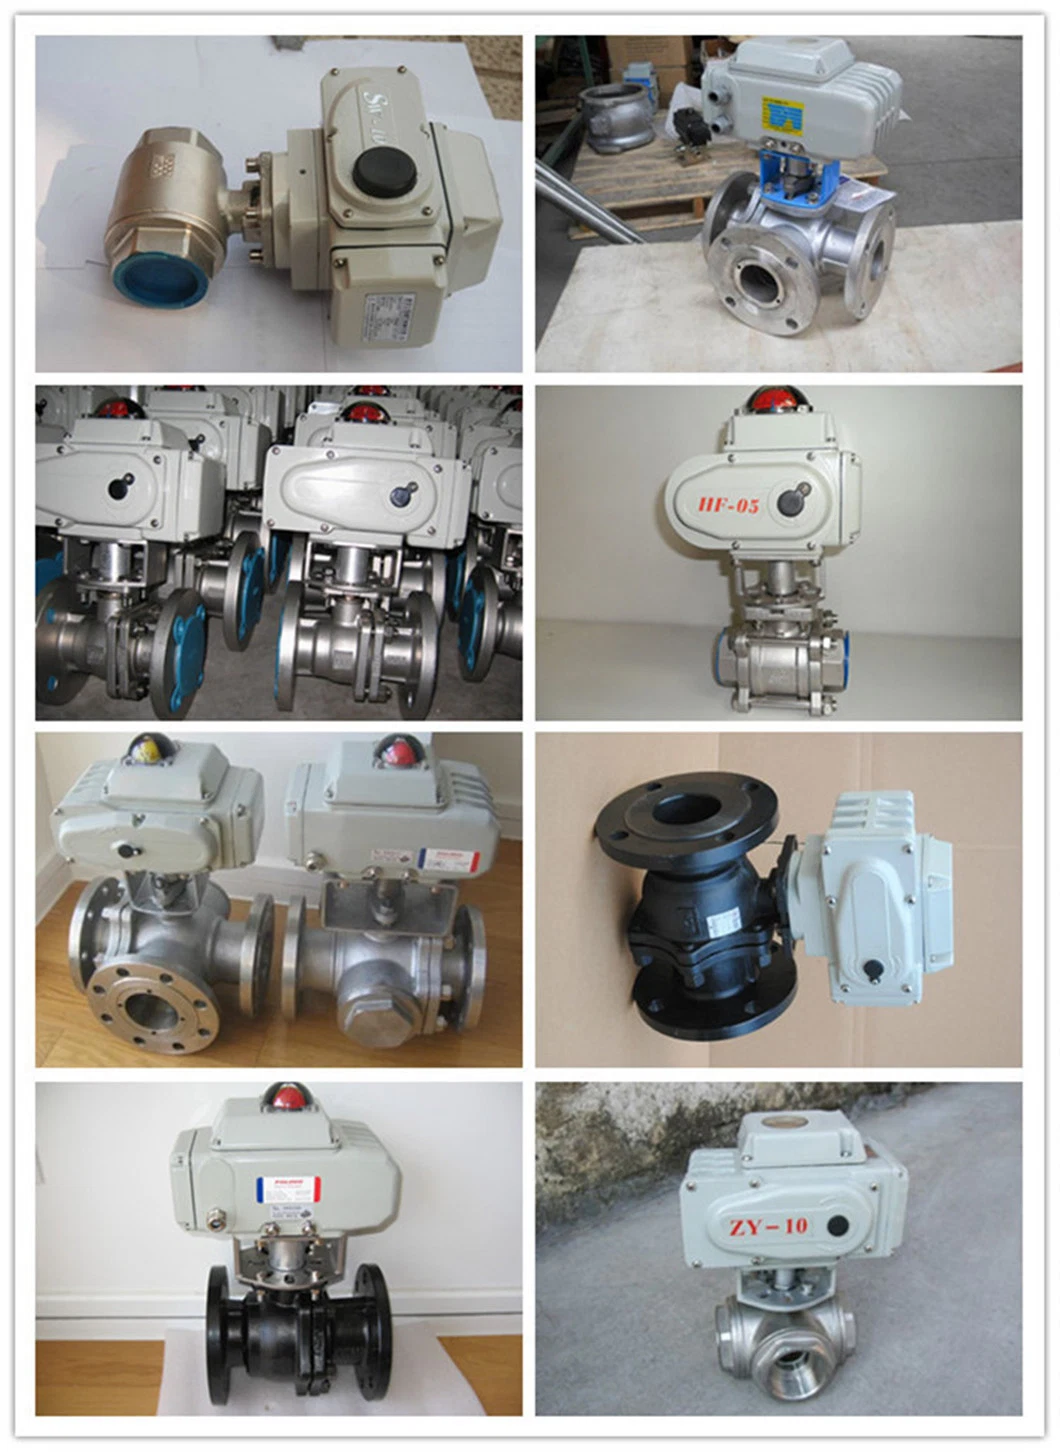 Electric Motorized Pneumatic Actuated SS316 Female Threaded 2PC Floating Ball Valve with Locking Device 2 Piece/2PC/3PC/3 Piece/ Three Piece Ball Valve